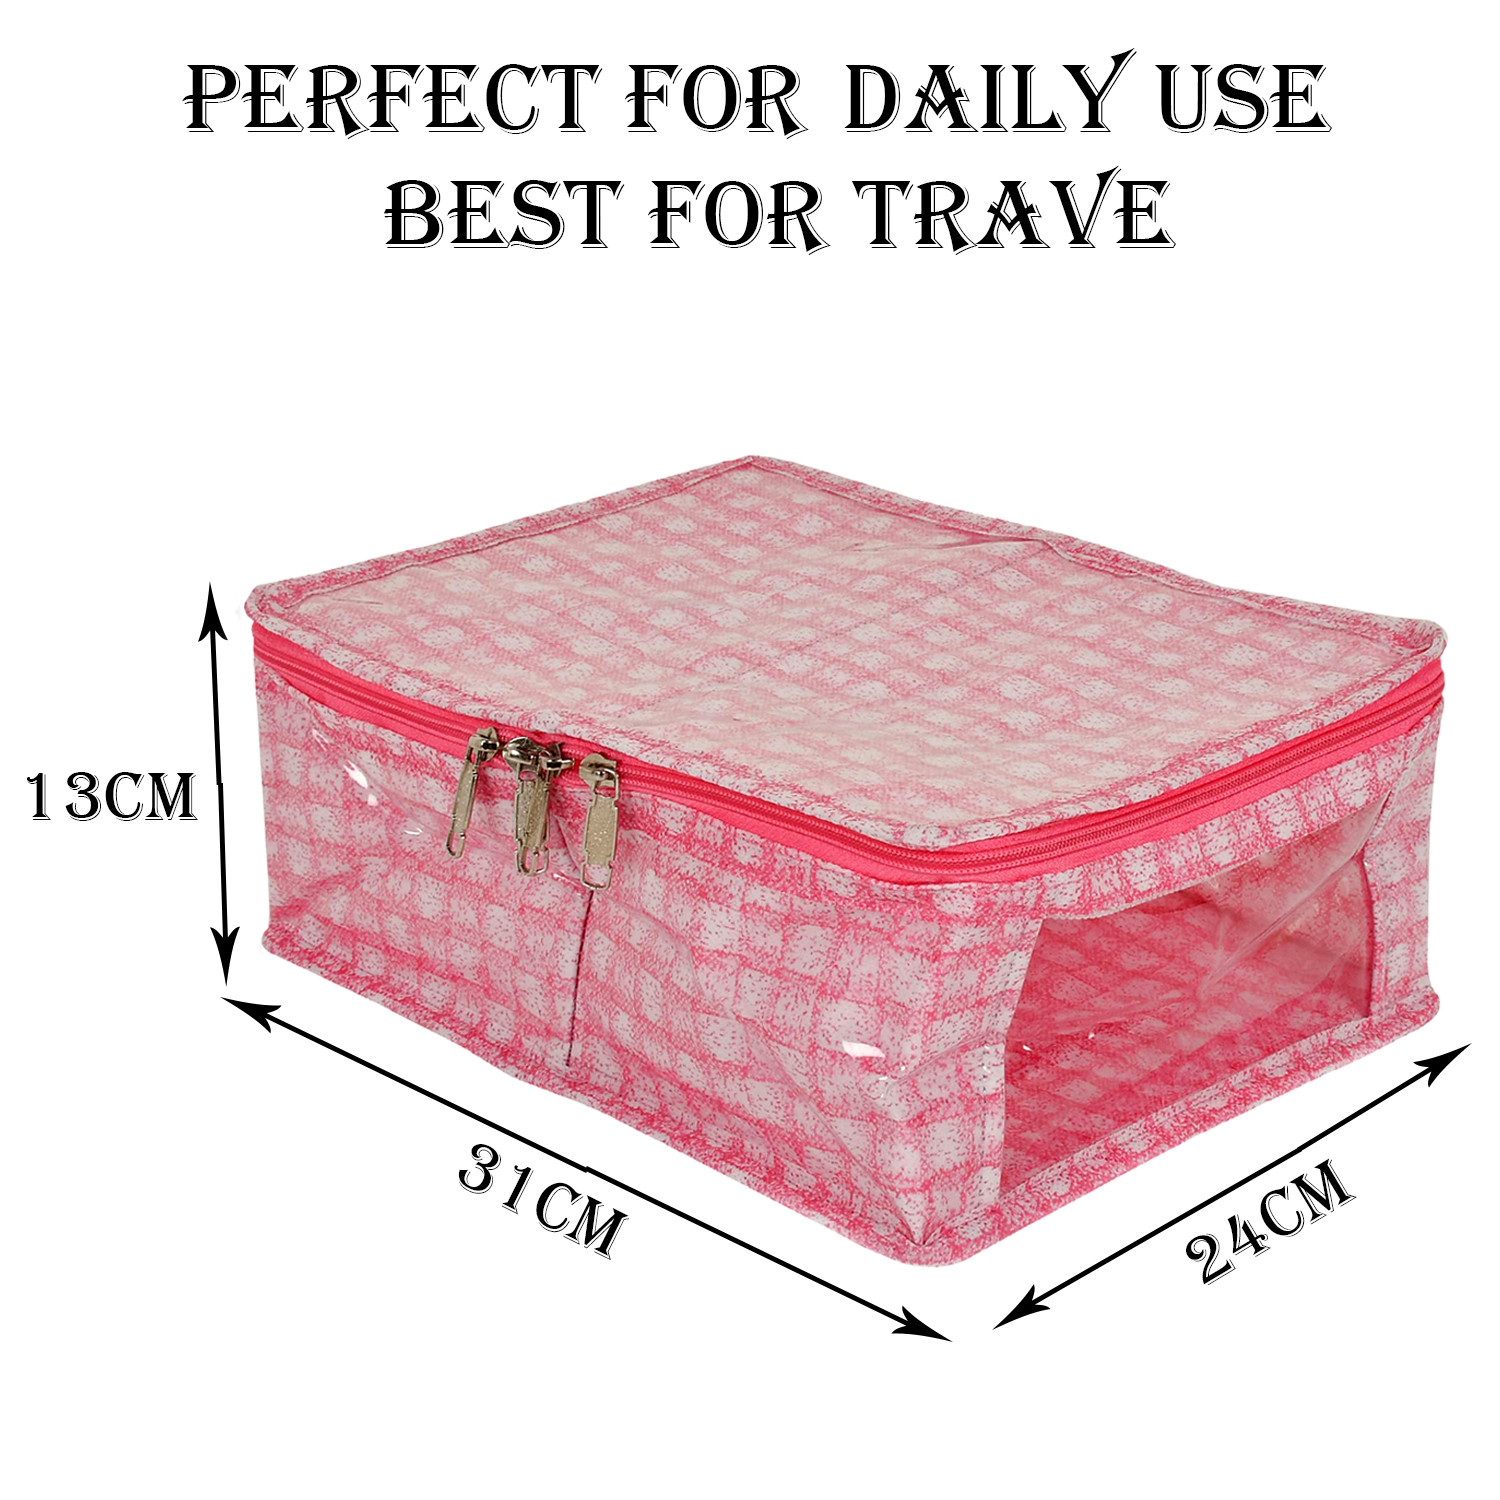 Kuber Industries Under Garment Kit | PVC Coated Check Design Innerwear Bag | Two Partition UG Kit for Man & Woman | Travel Toiletry Kit with Transparent View | Pink